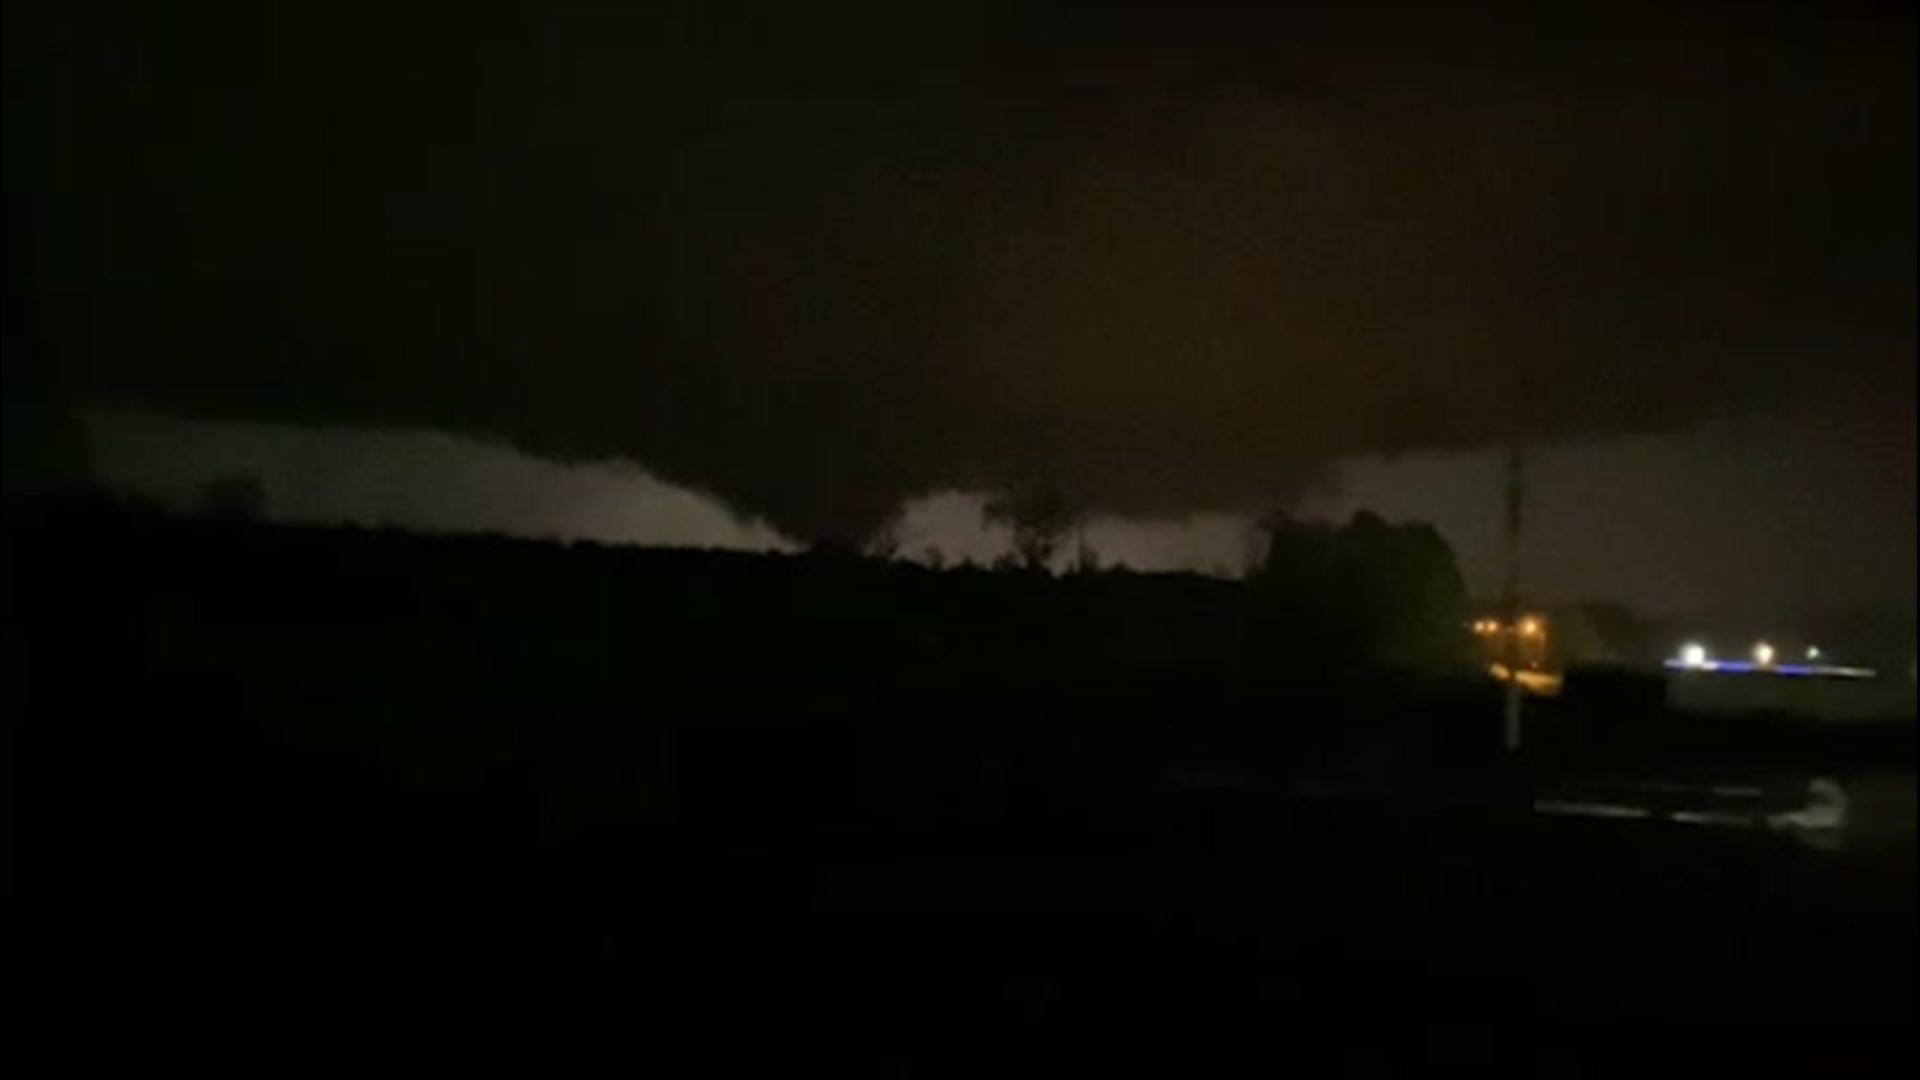 As severe thunderstorms slammed the south-central and southeastern U.S. on April 9, at least one tornado was spotted touching down in Mississippi.